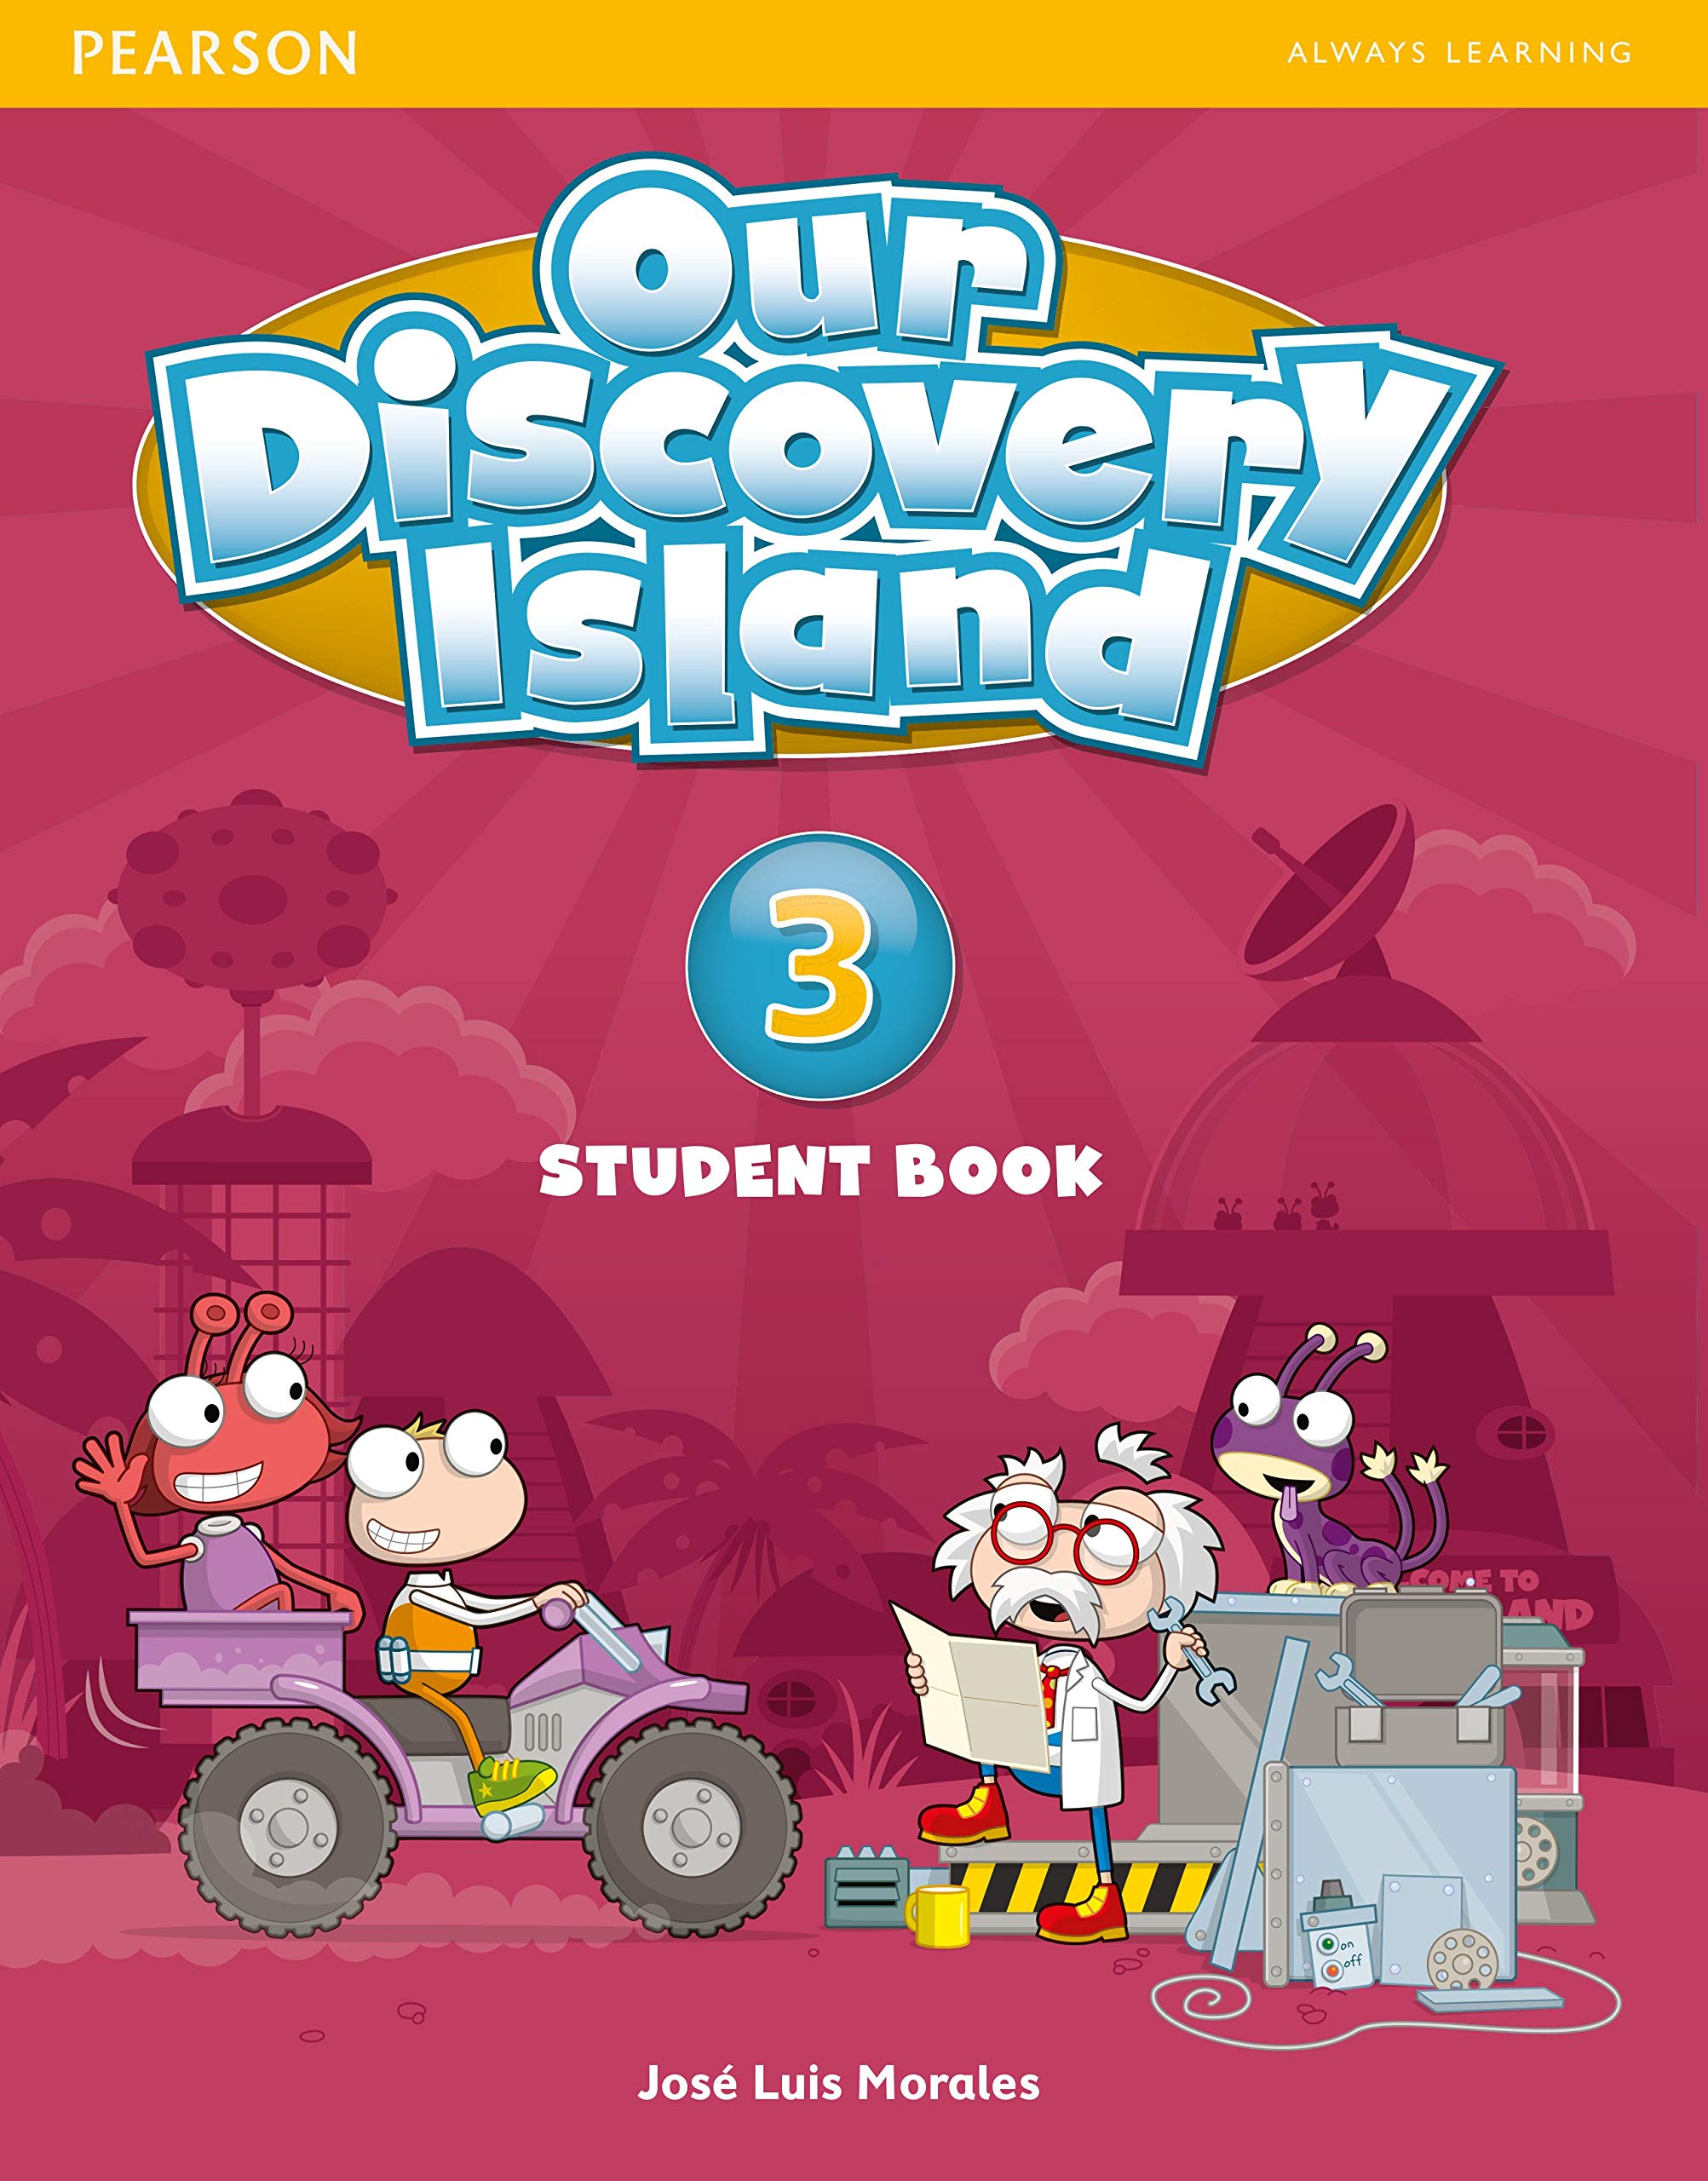 YORK OUR DISCOVERY ISLAND 3 STUDENT BOOK - Pearson